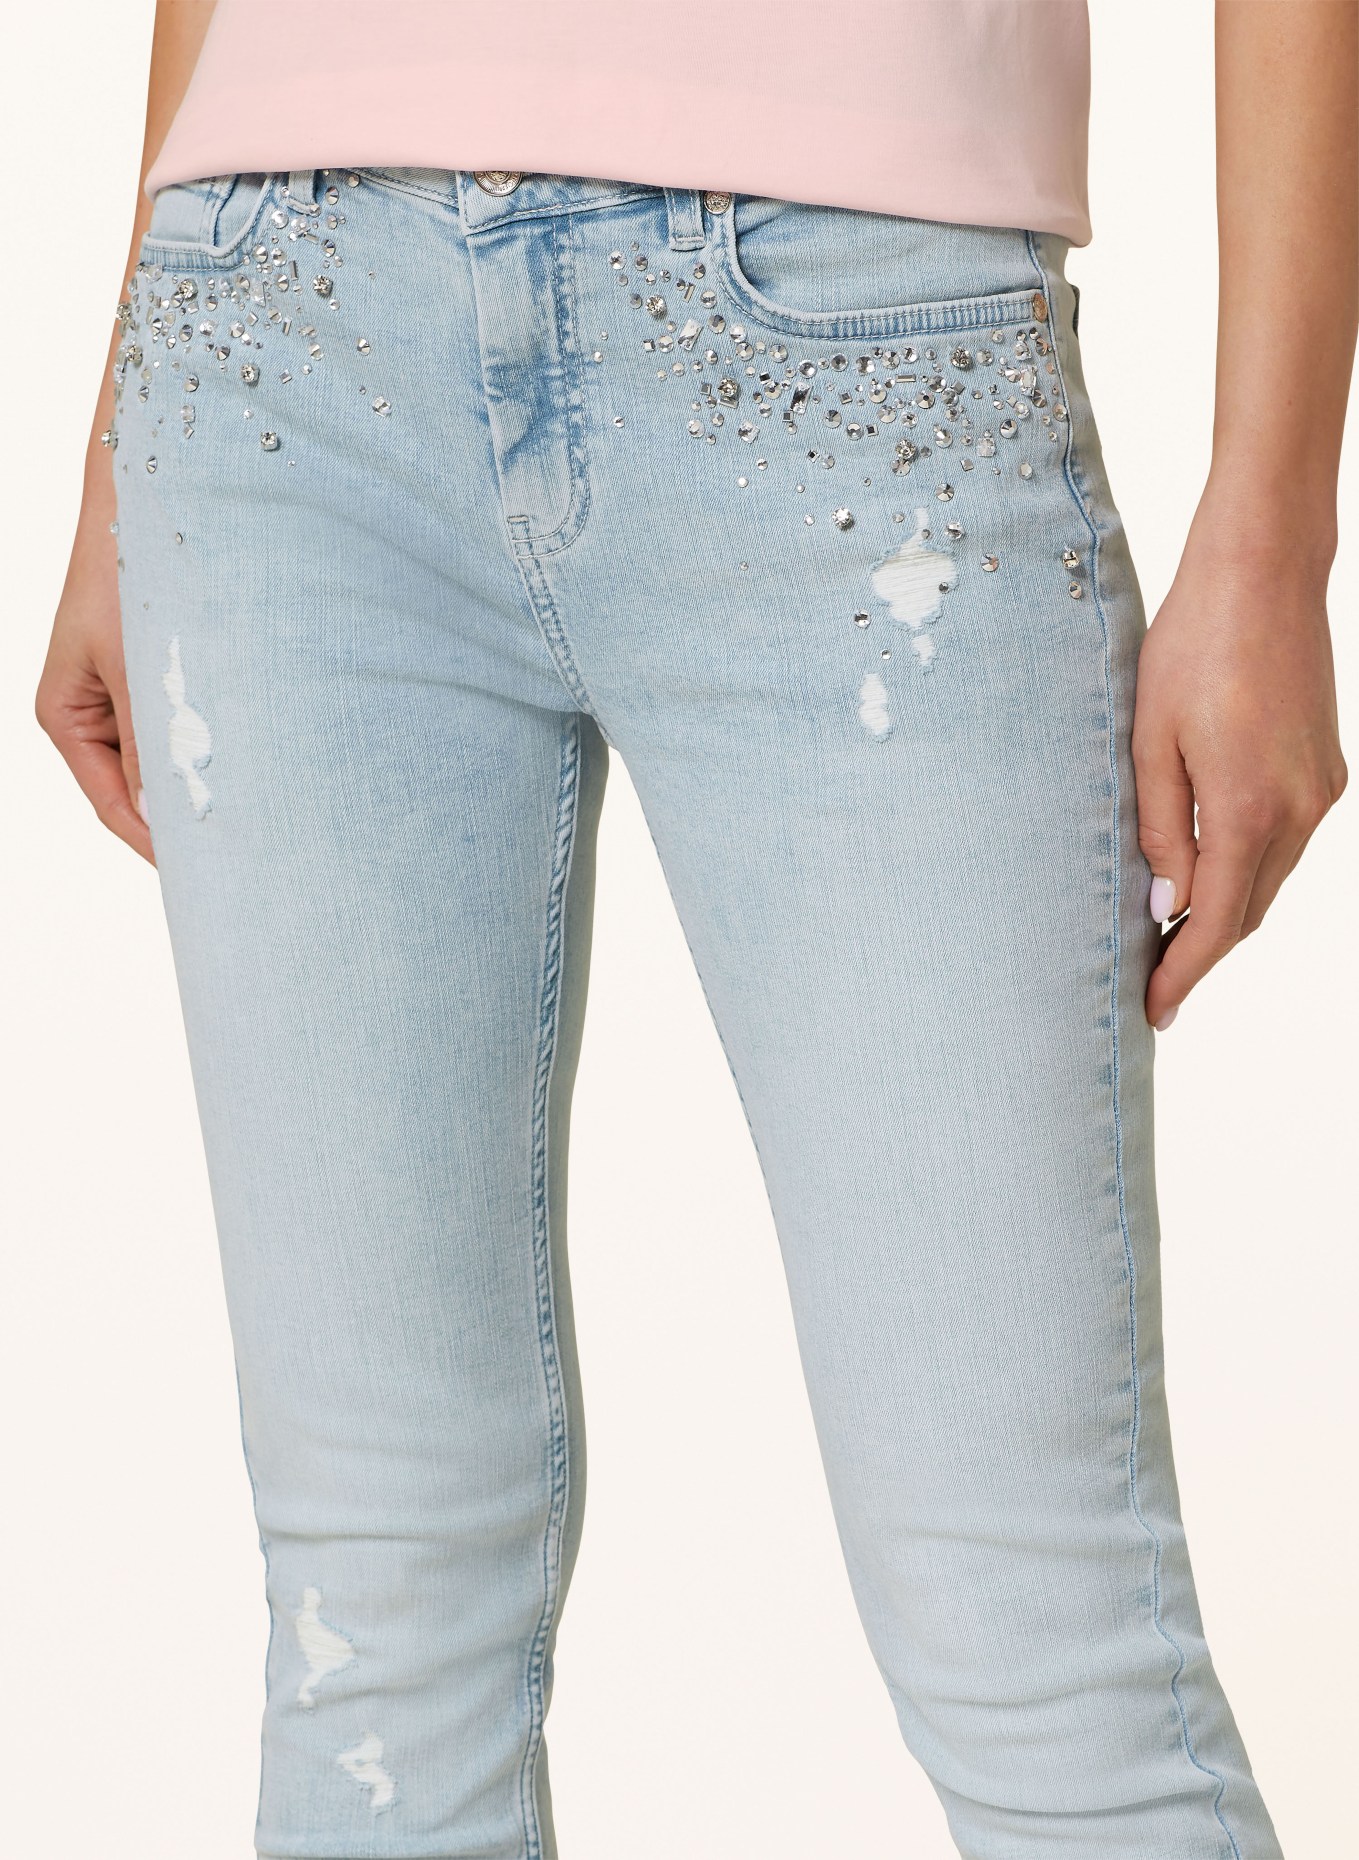 monari Skinny jeans with decorative gems, Color: 750 jeans (Image 5)